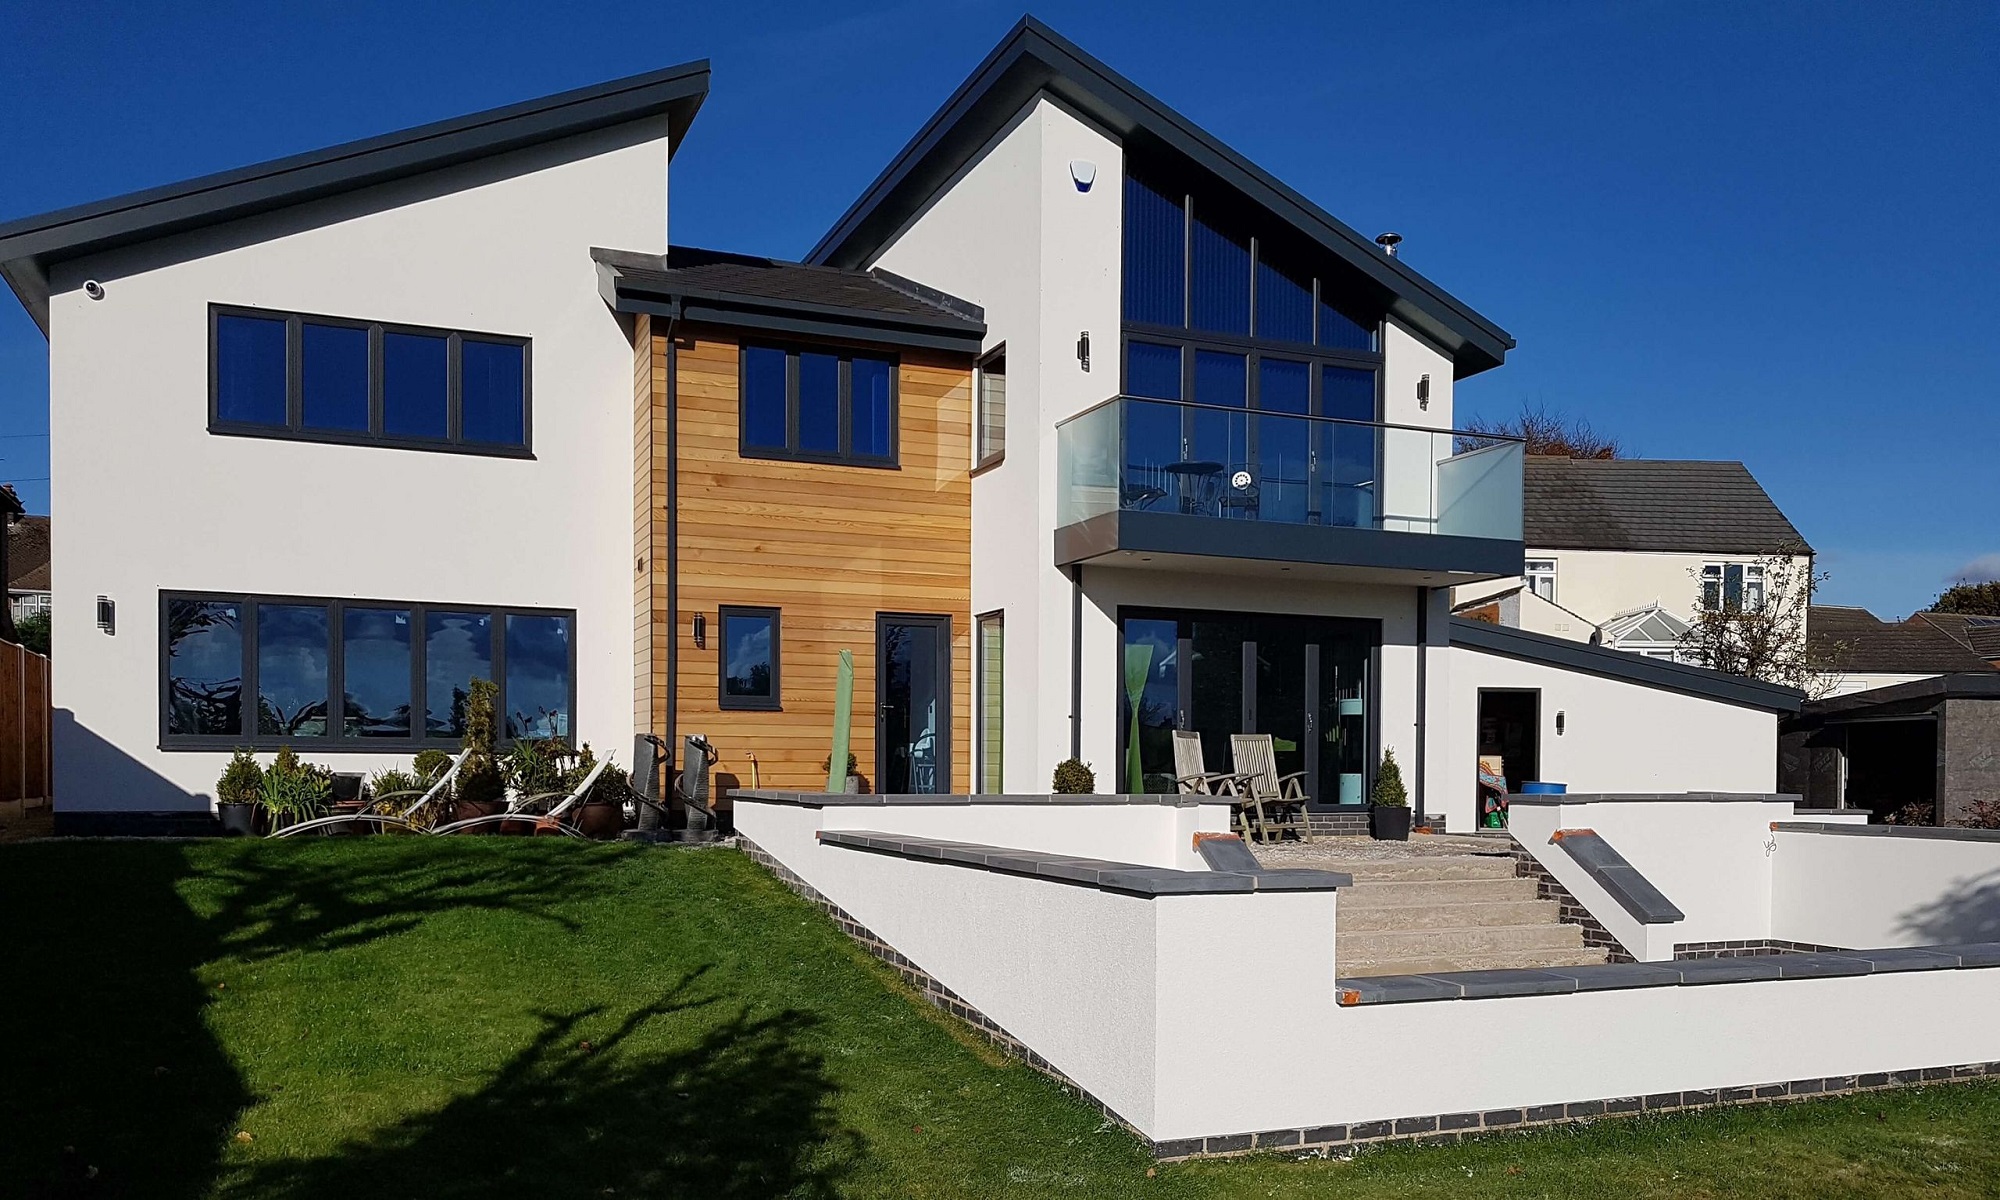 Proguard Exteriors Company elucidated its view on external wall insulation, how it works, its benefits, and why homeowners must consider using it